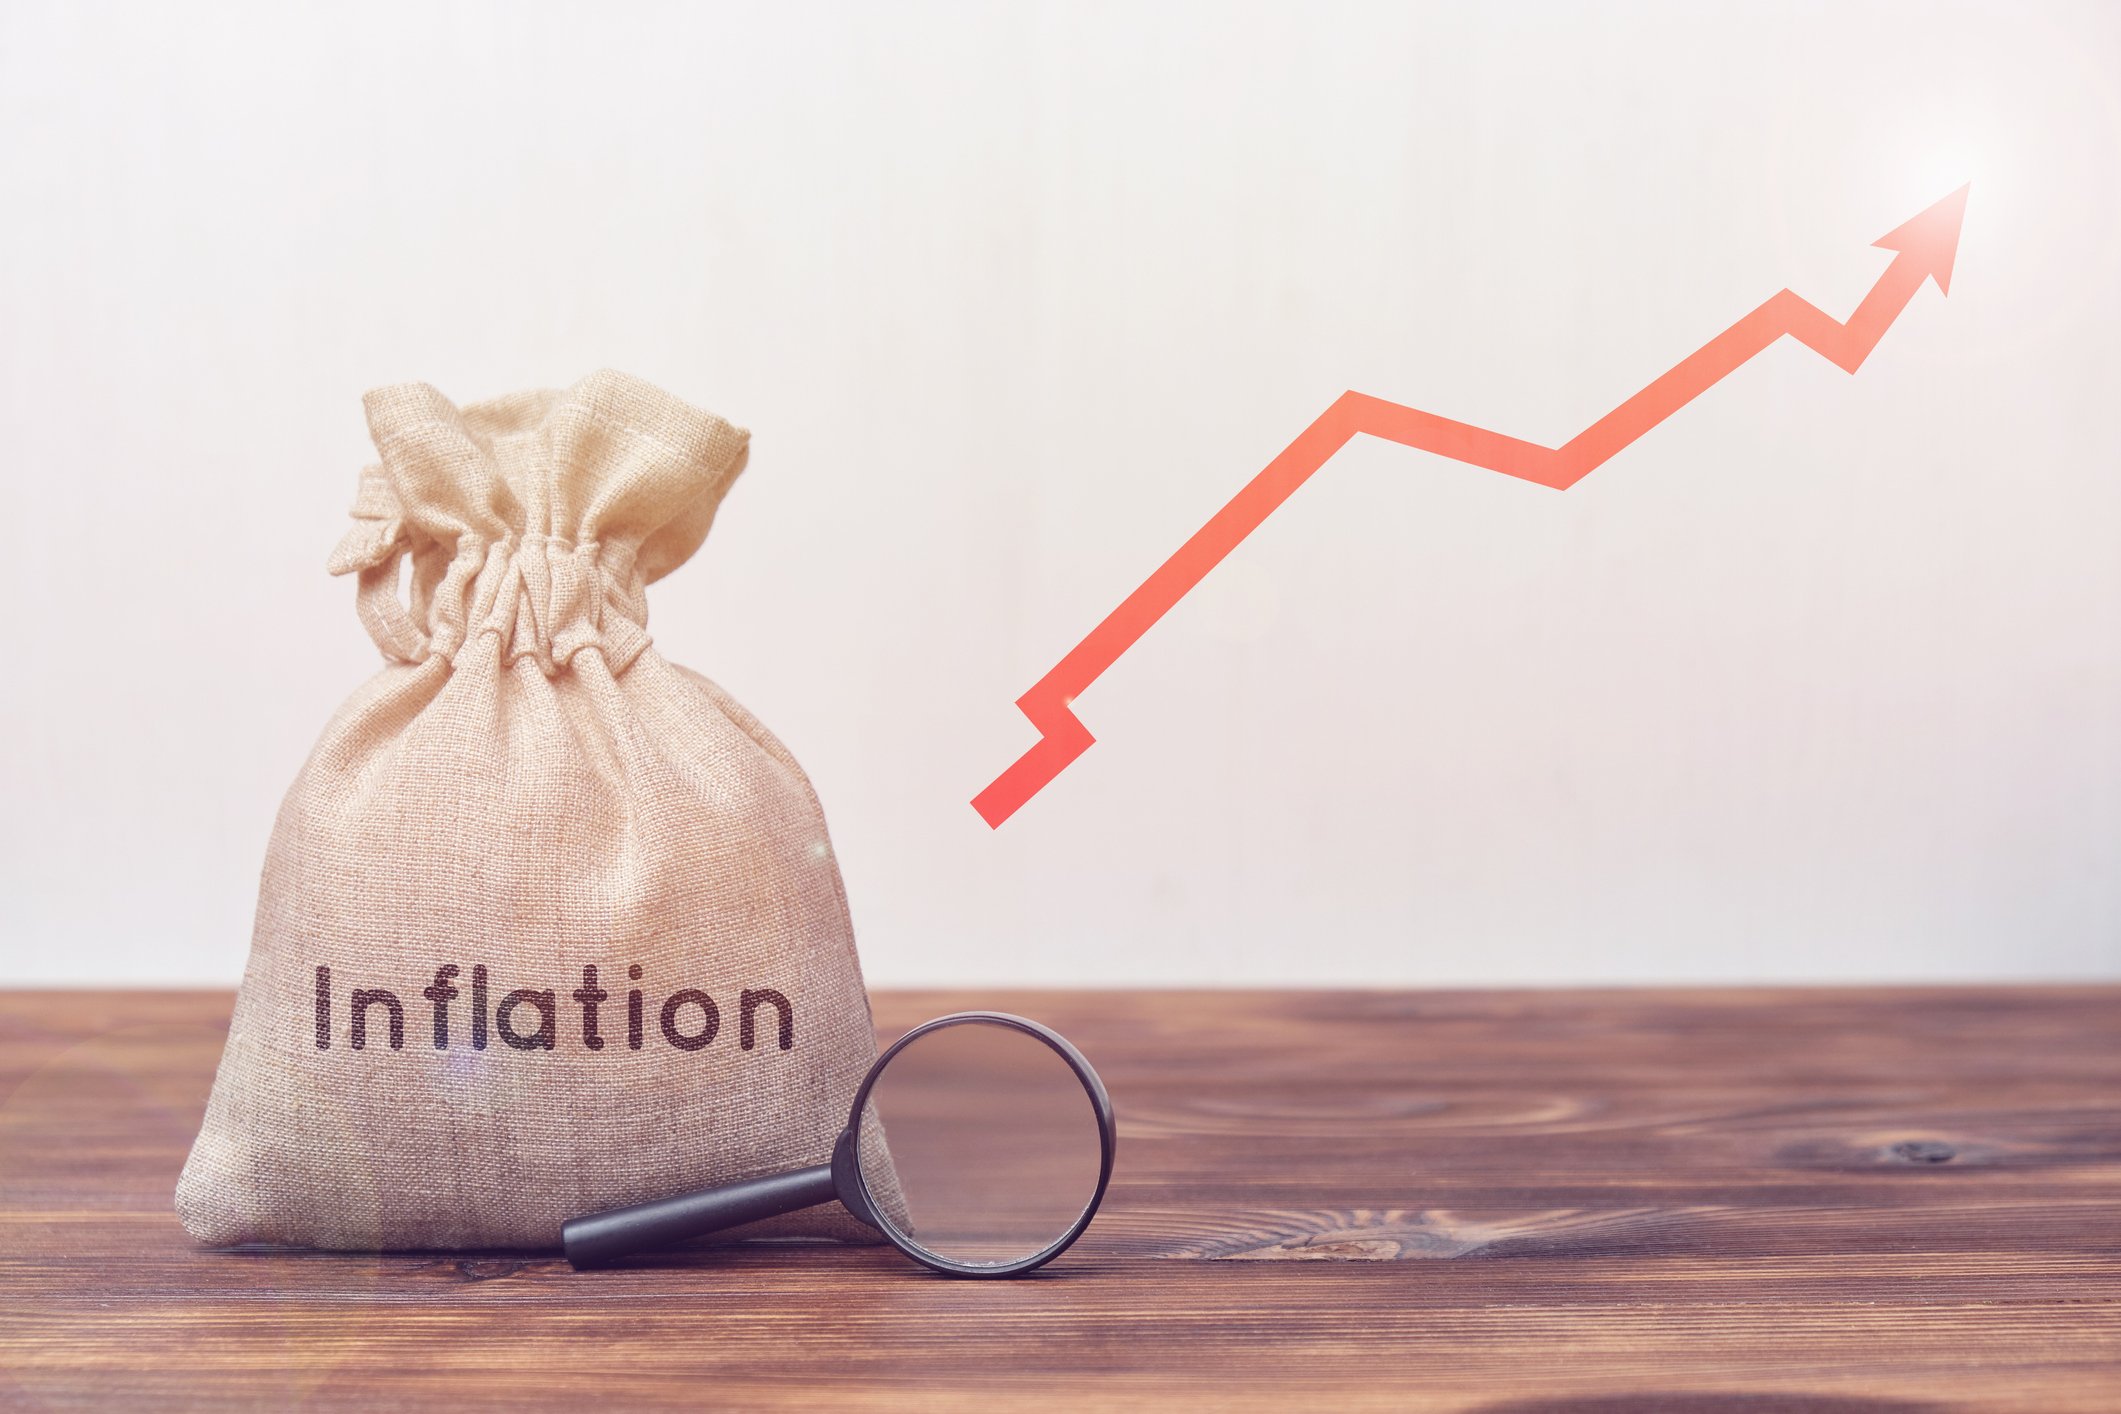 B.A. Schrock Financial Group | Will We See More Inflation in 2022?